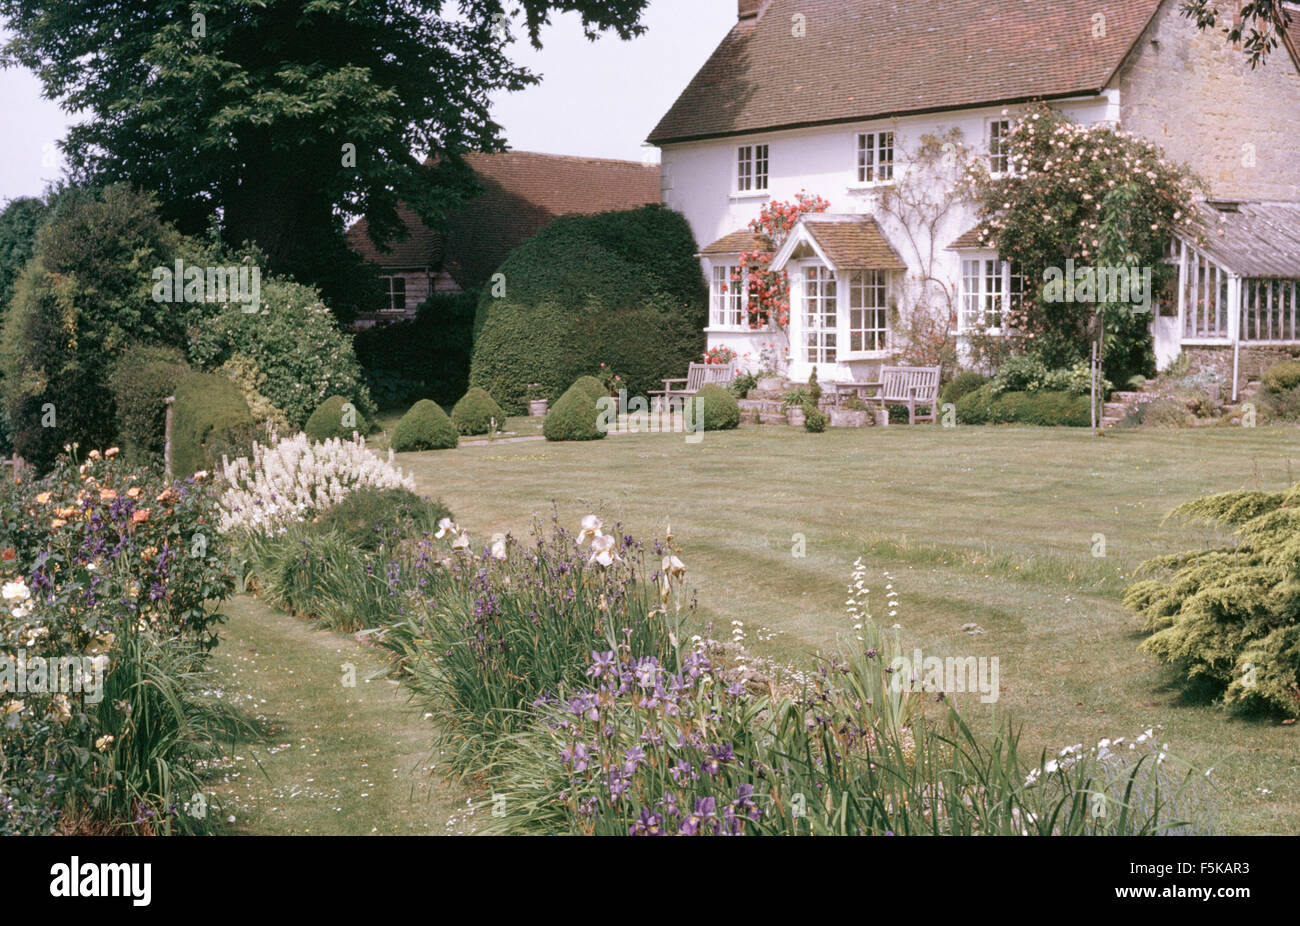 Exterior of country house with clipped box balls edging the lawn Stock Photo